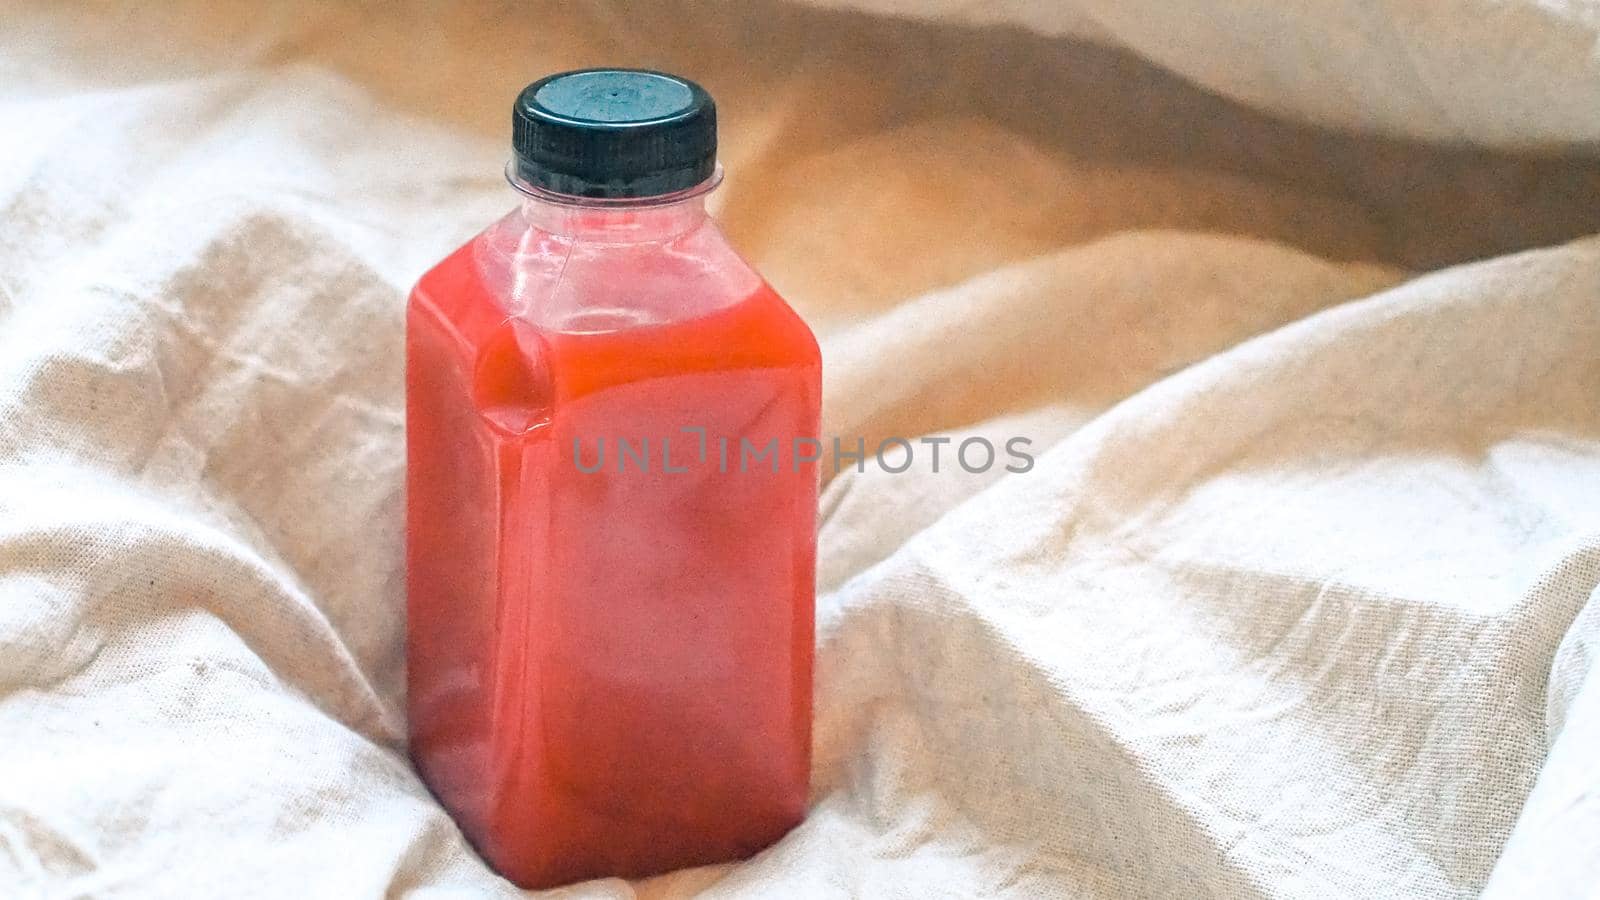 Healthy drink Cranberry juice in a bottle on linen background by Petrichor